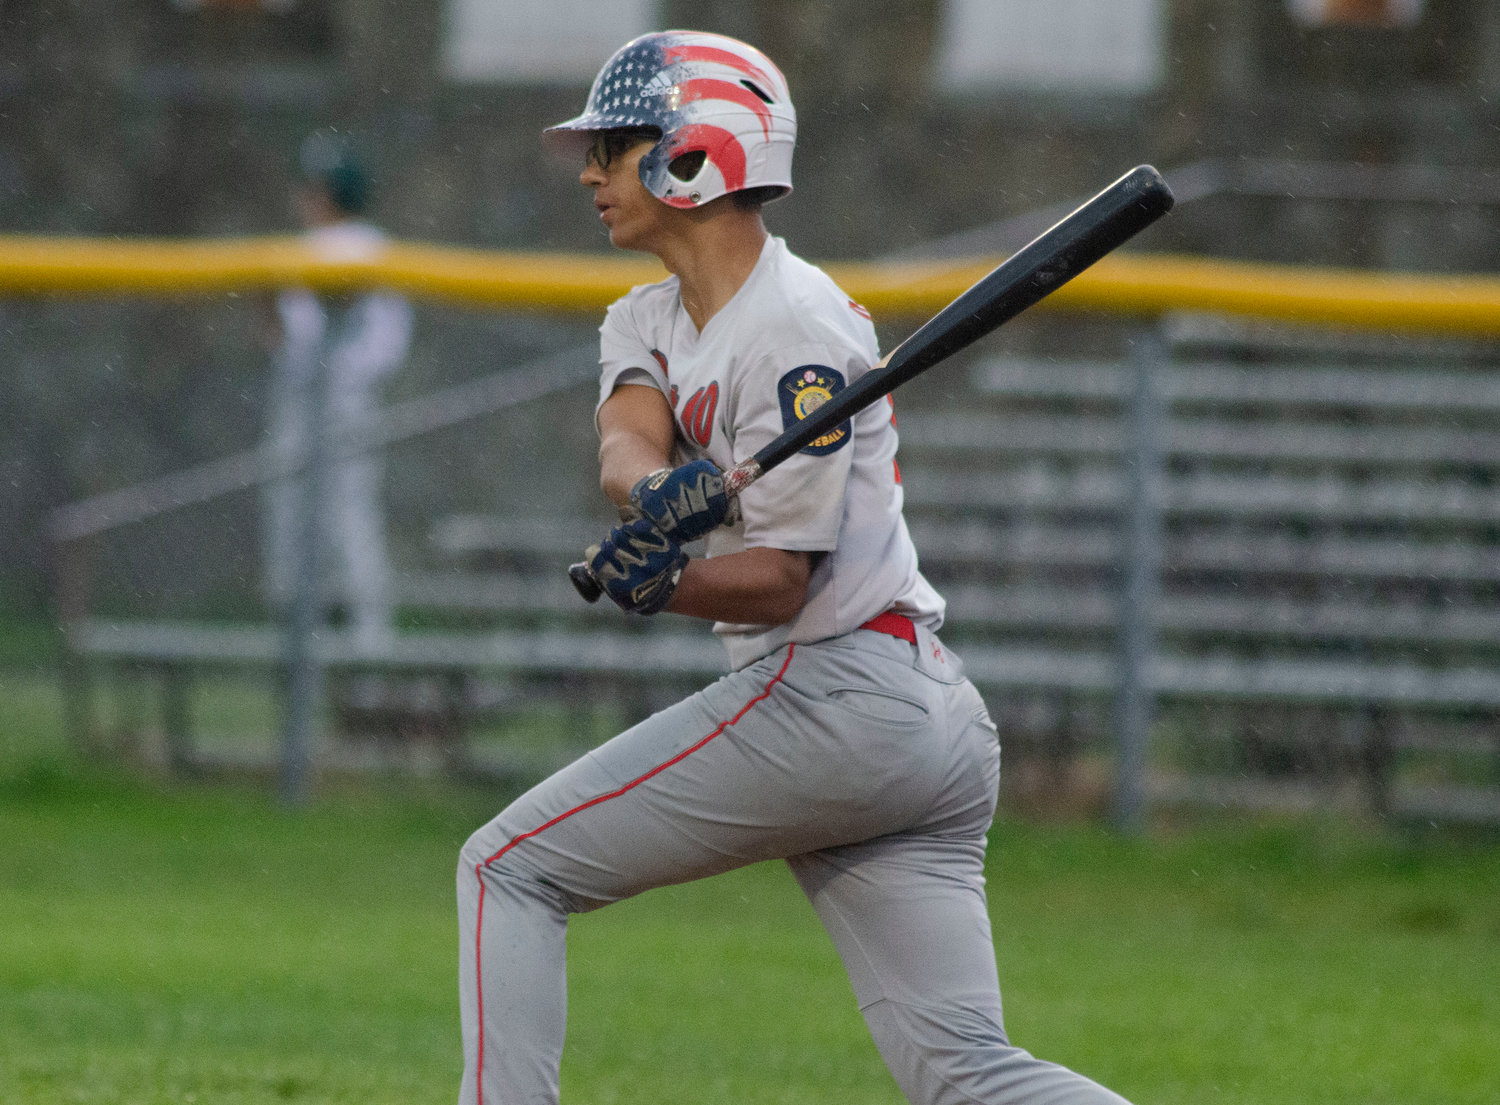 Post 10’s Jarod Vieira smacks a hit during the game Thursday night, July 29.